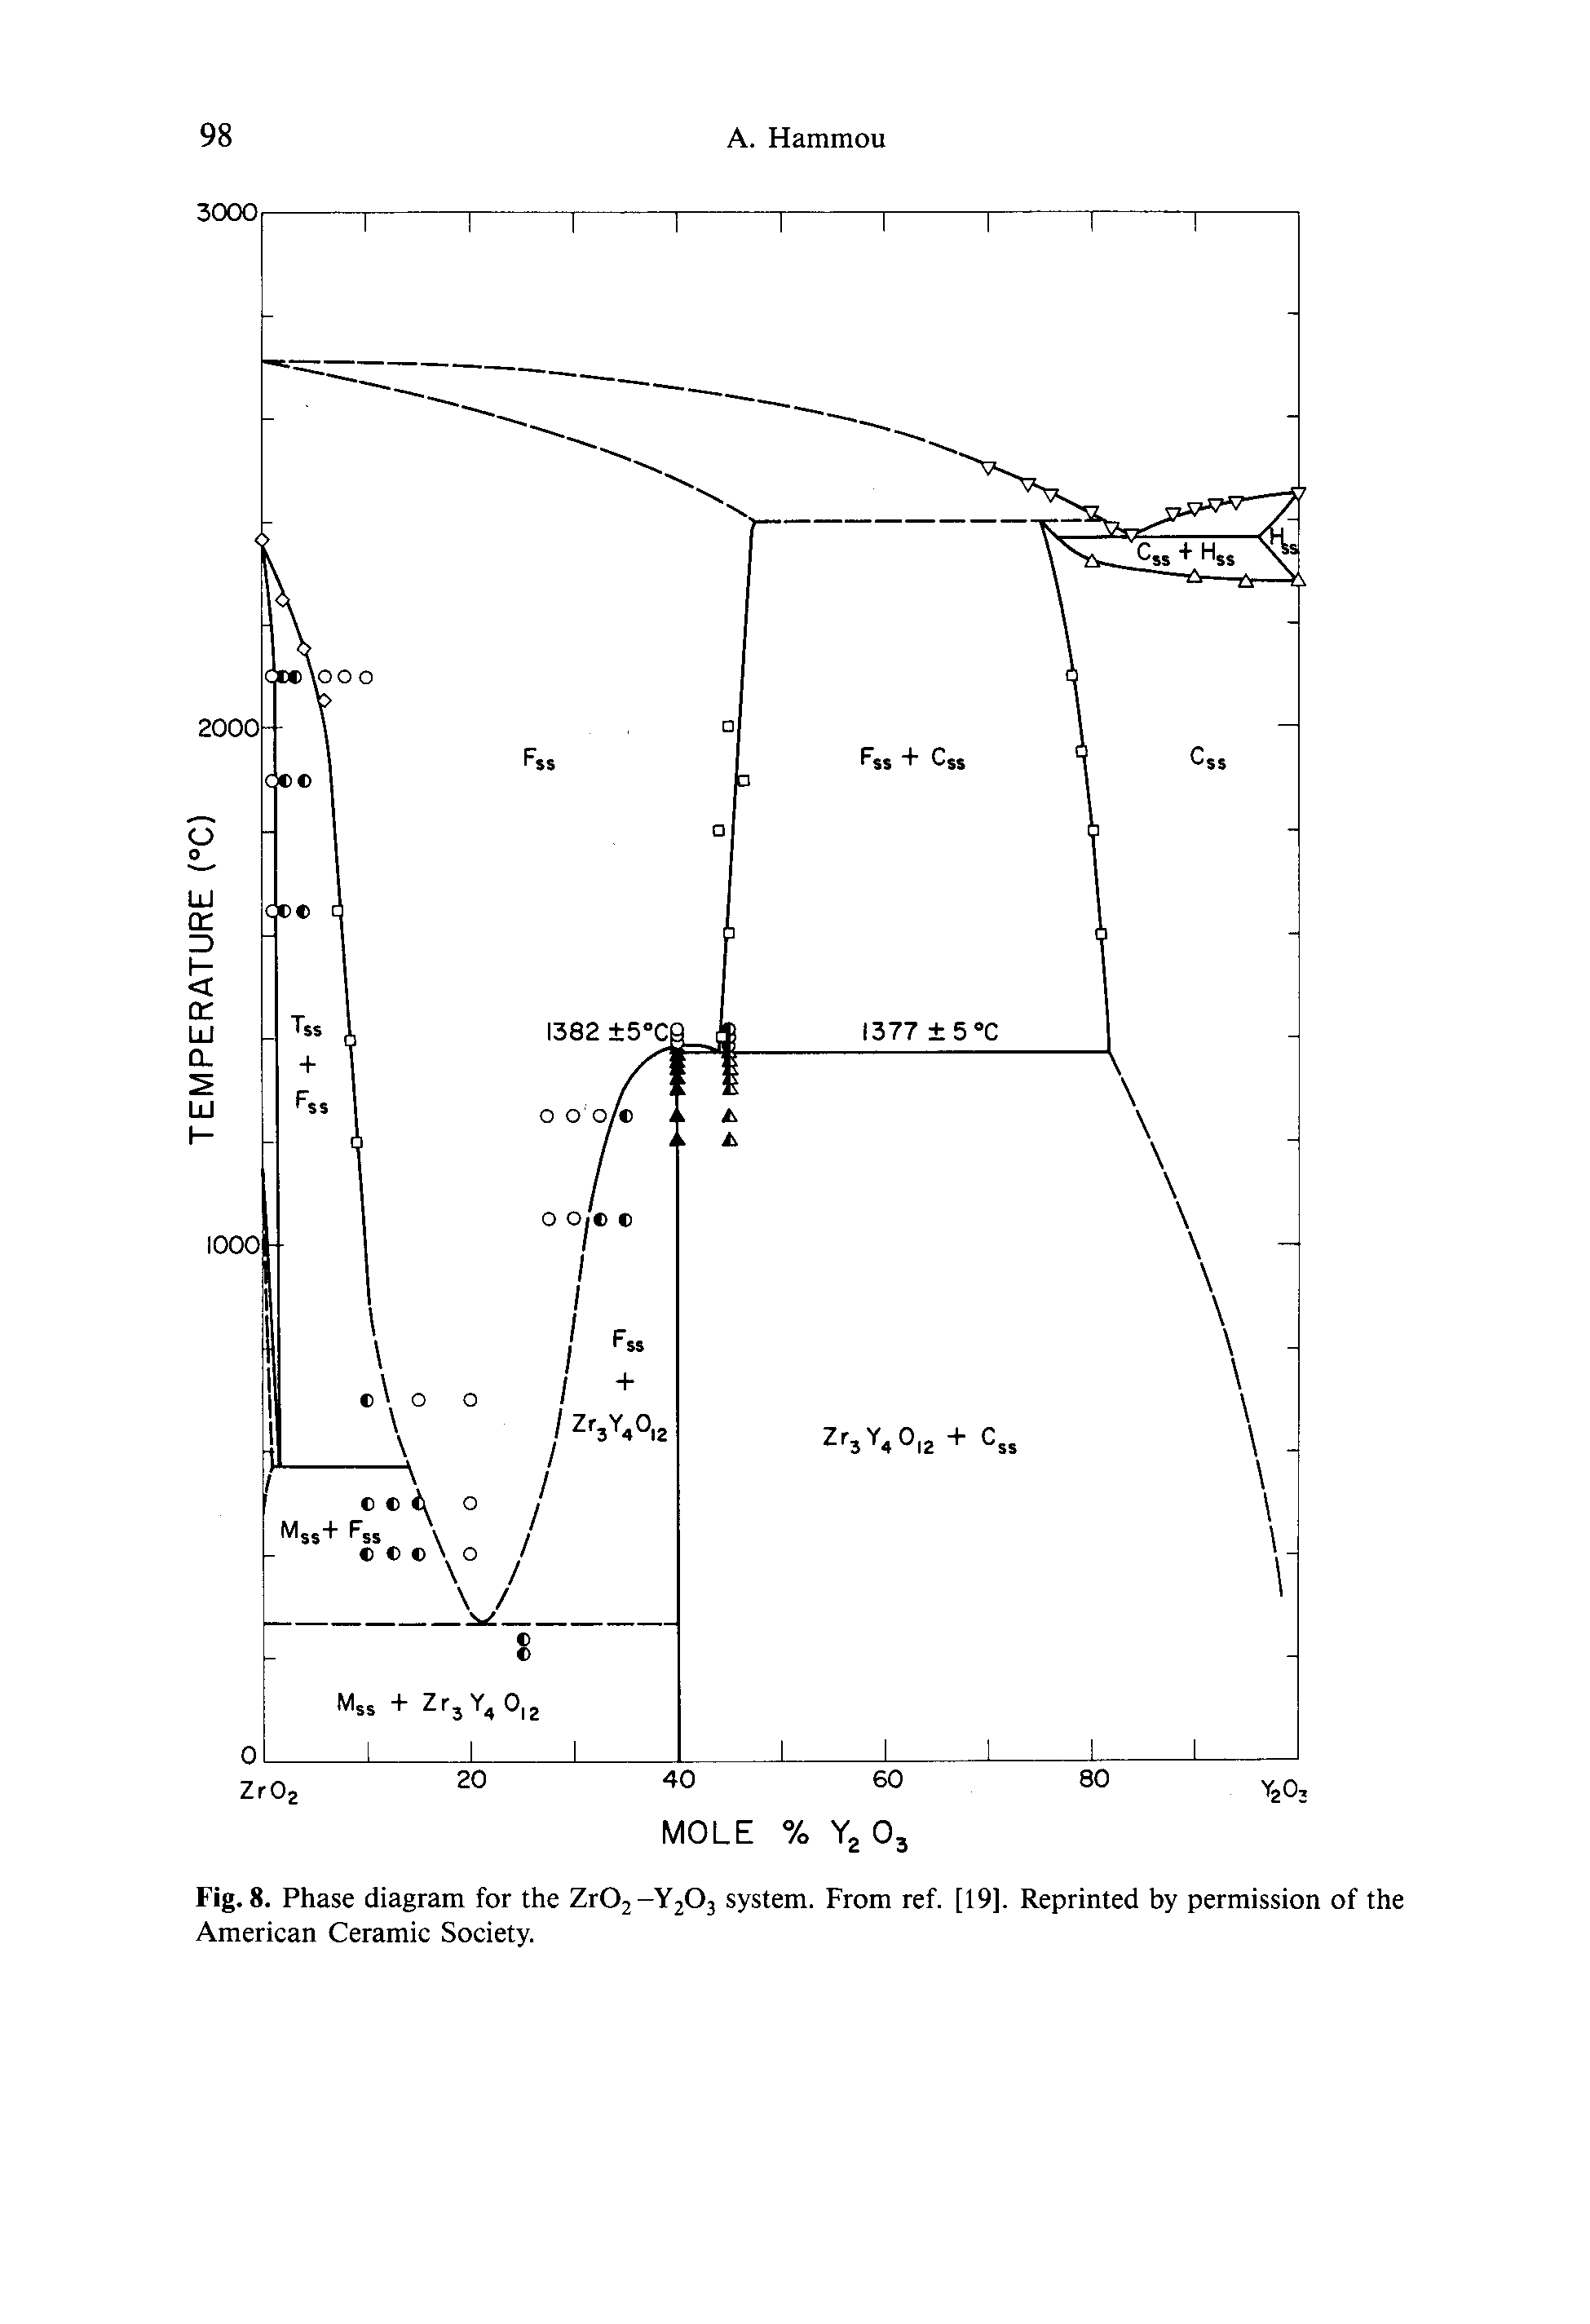 Fig. 8. Phase diagram for the Zr02-Y203 system. From ref. [19]. Reprinted by permission of the American Ceramic Society.